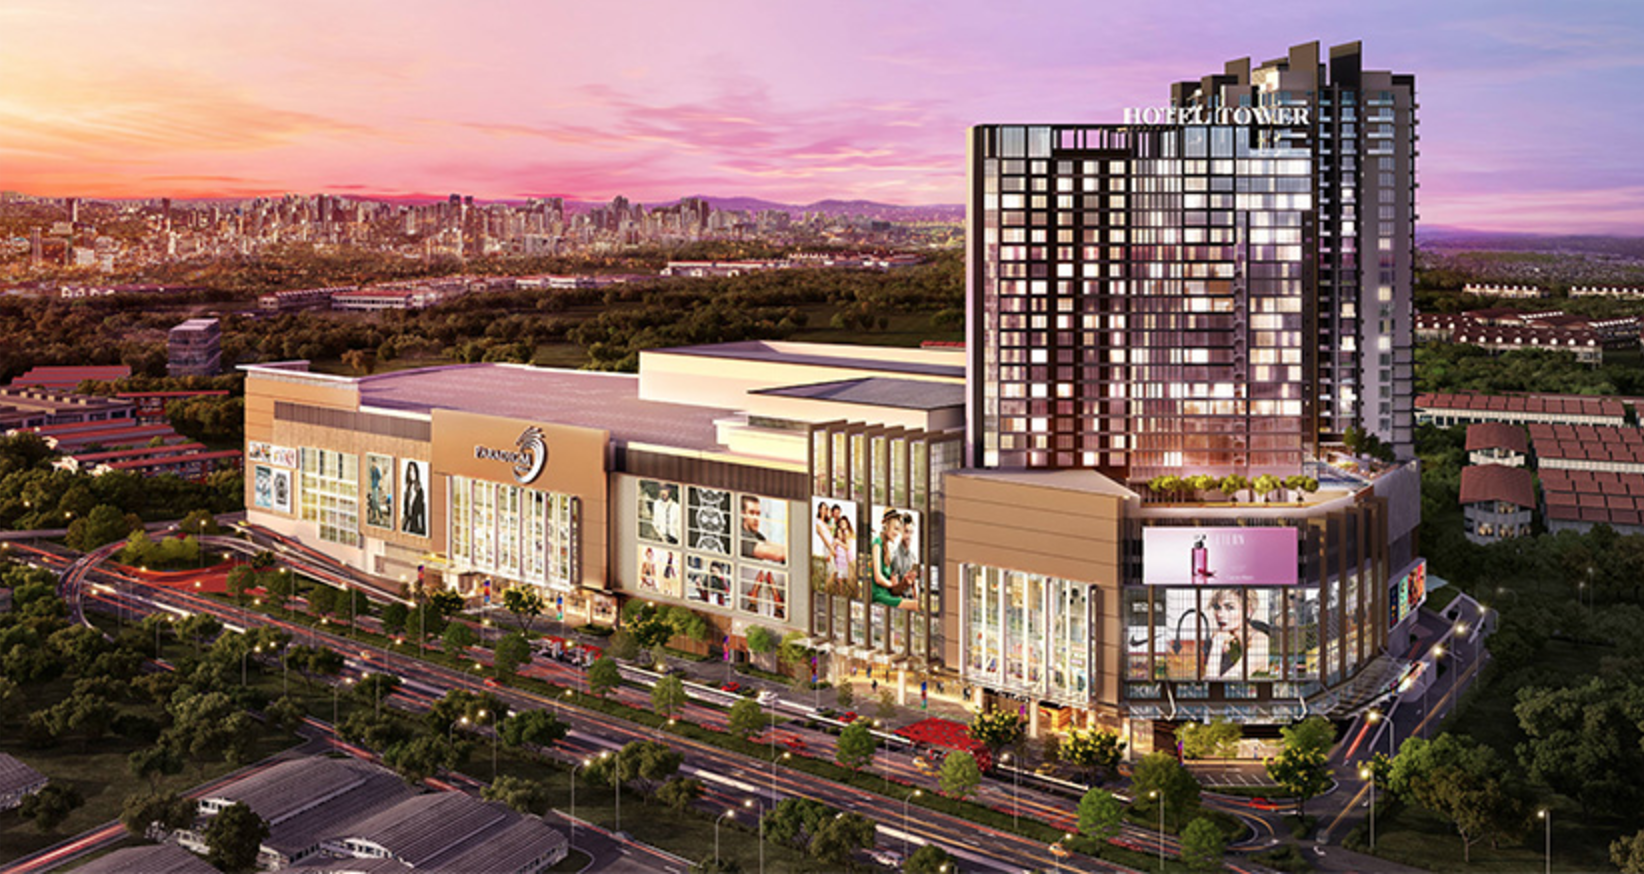 4 upcoming malls in Johor Bahru that S'poreans will brave 2-hour